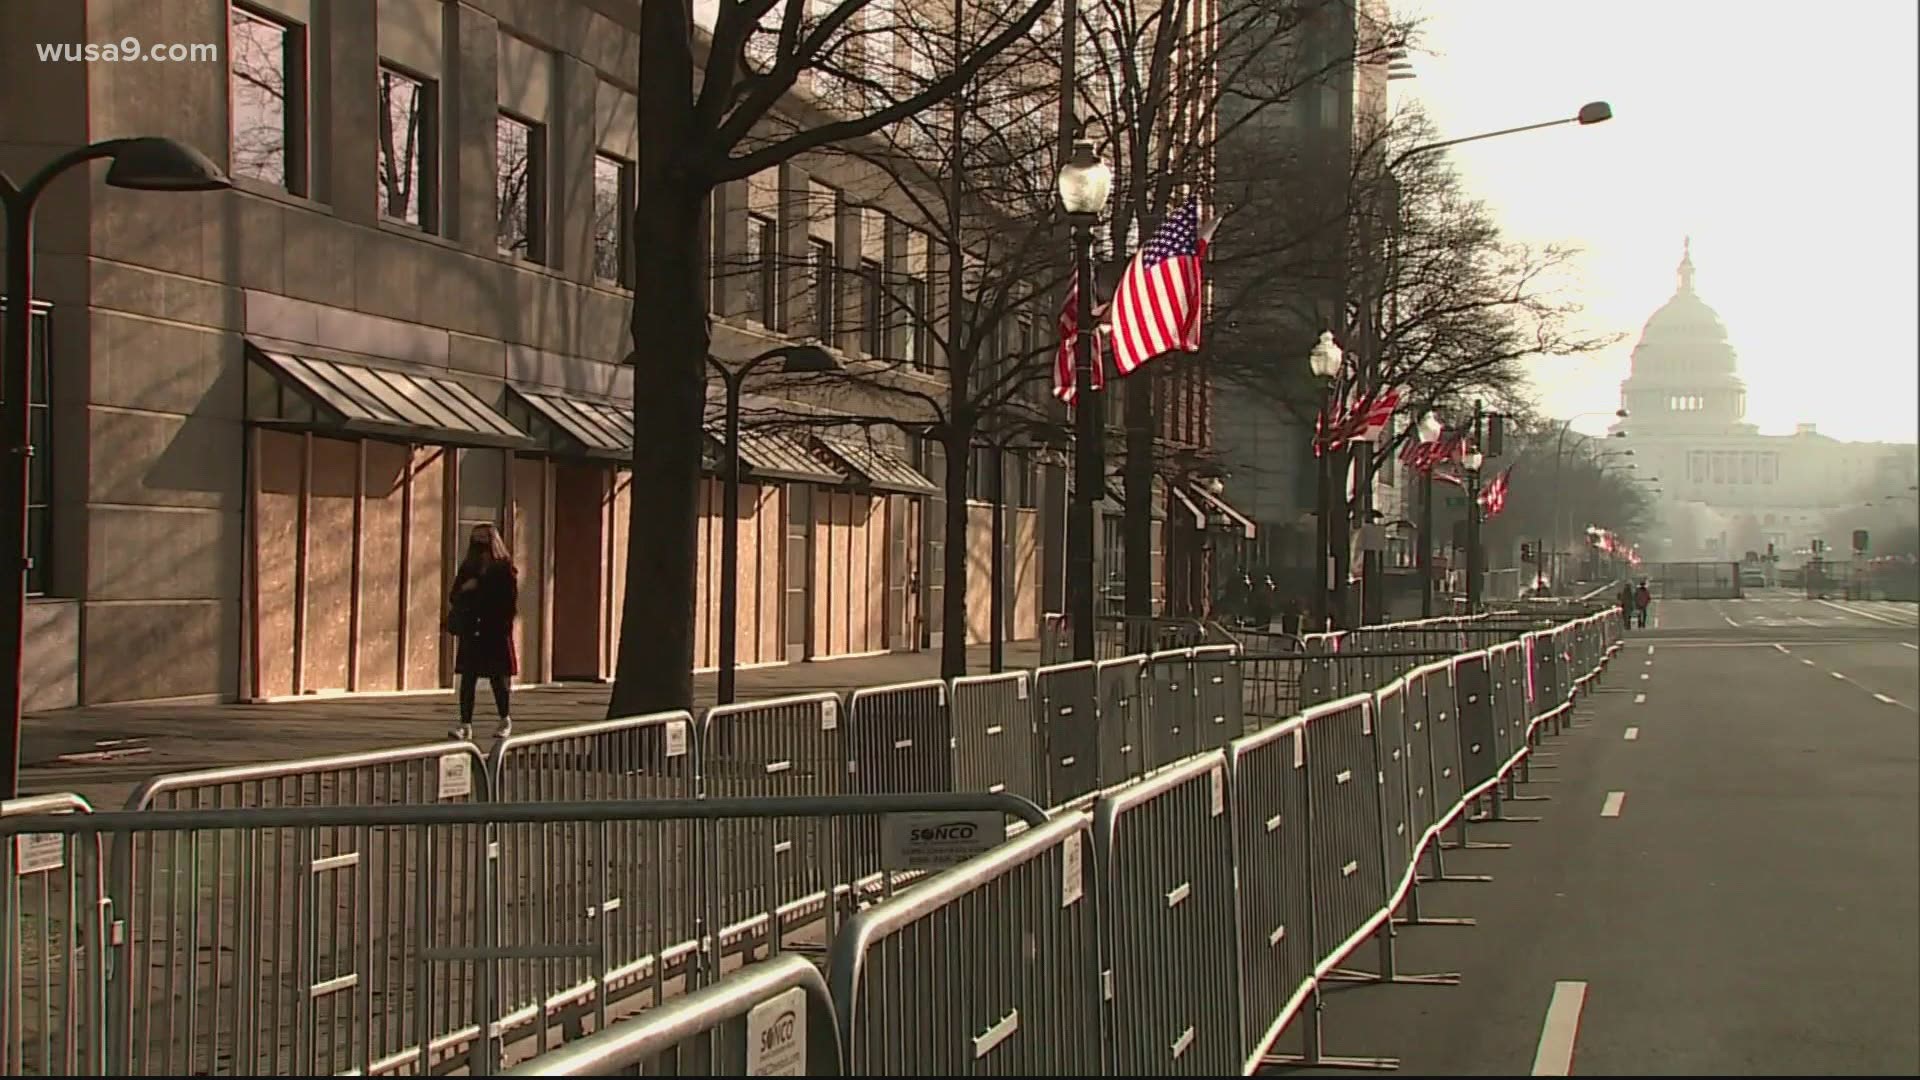 D.C. residents and visitors to the Capitol next week will see unprecedented levels of security for Inauguration Day.